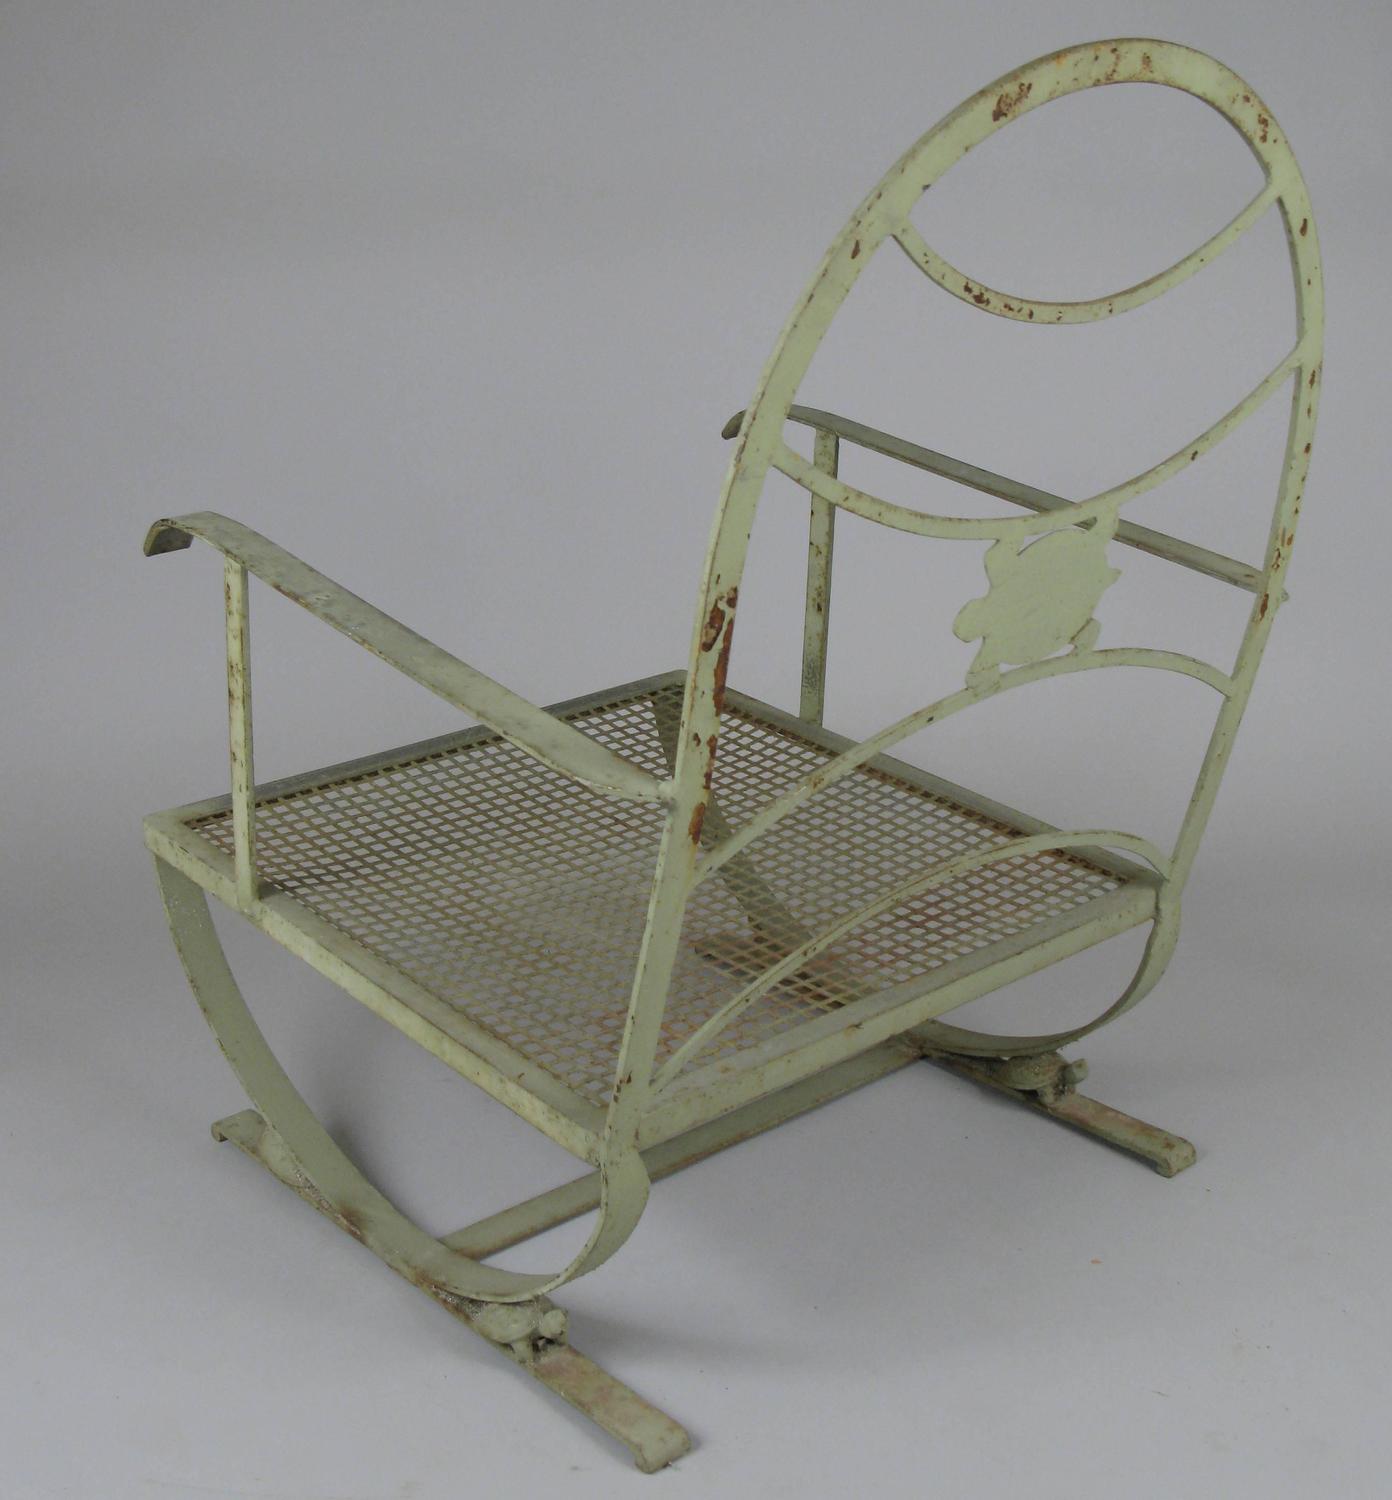 Vintage Wrought Iron Turtle Lounge Chair at 1stdibs